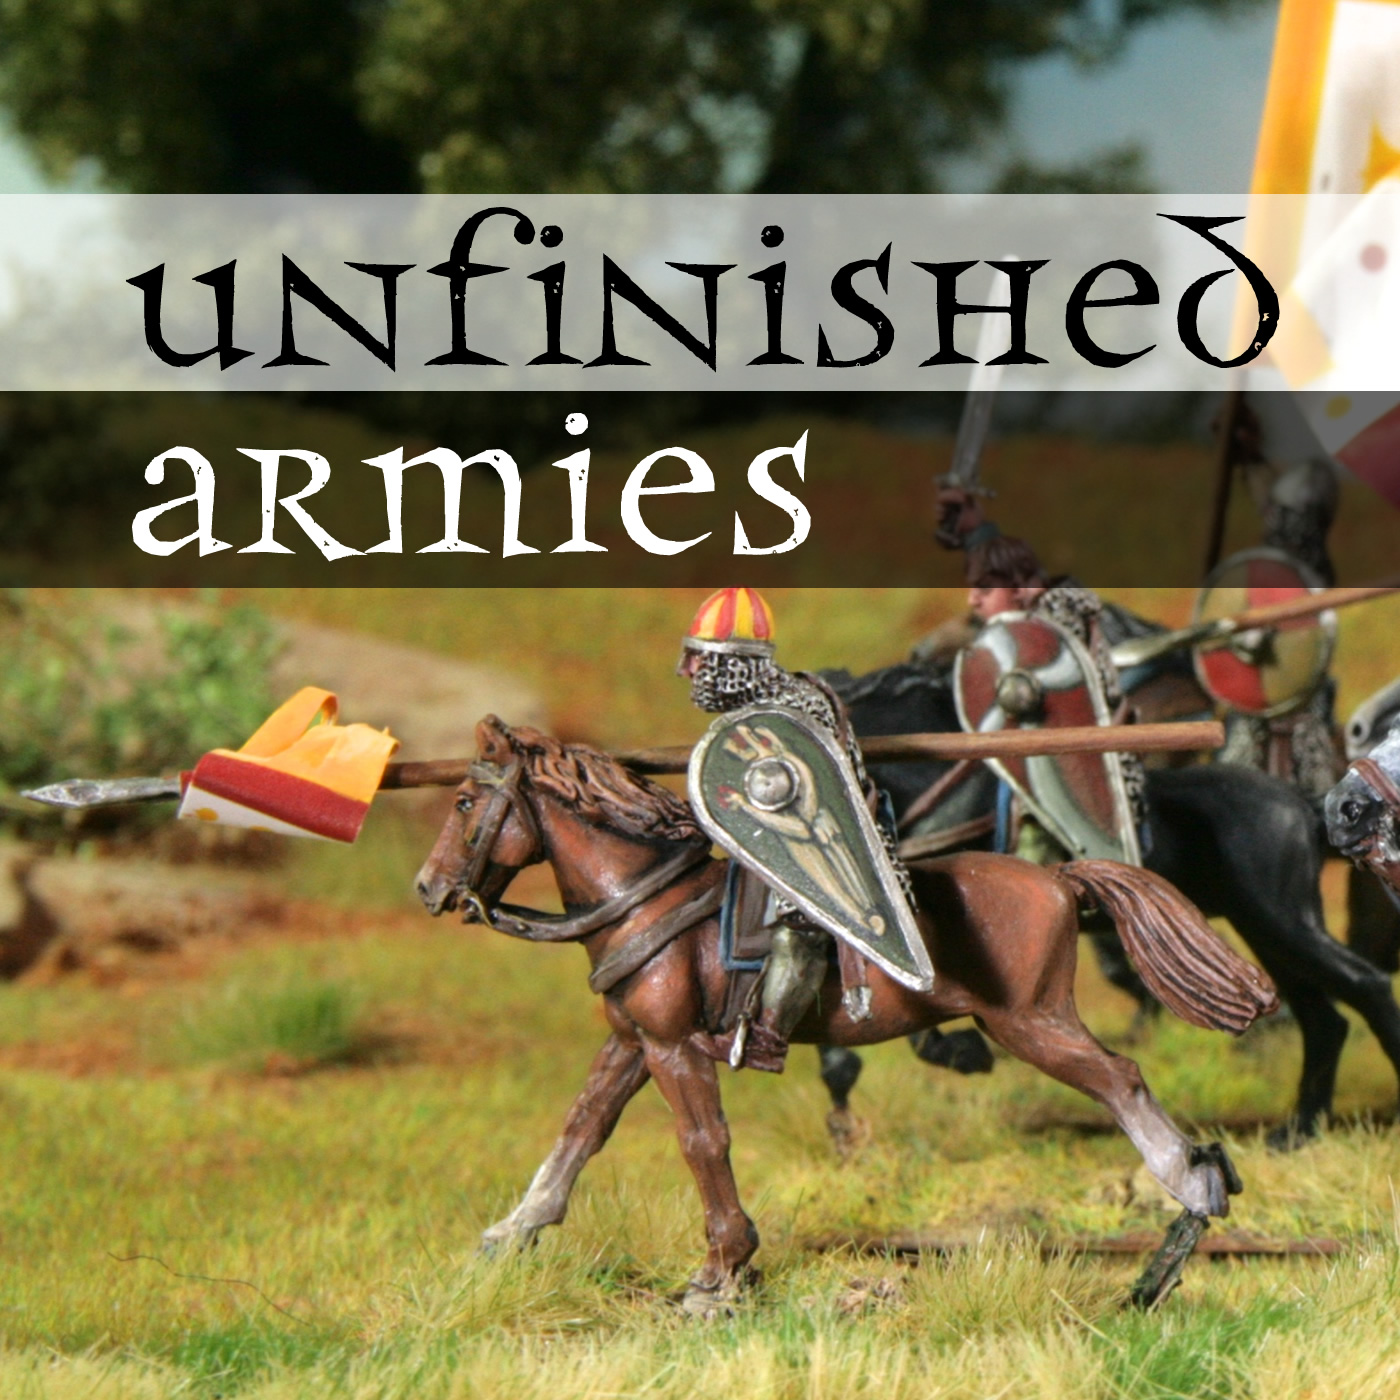 Unfinished Armies Podcast artwork